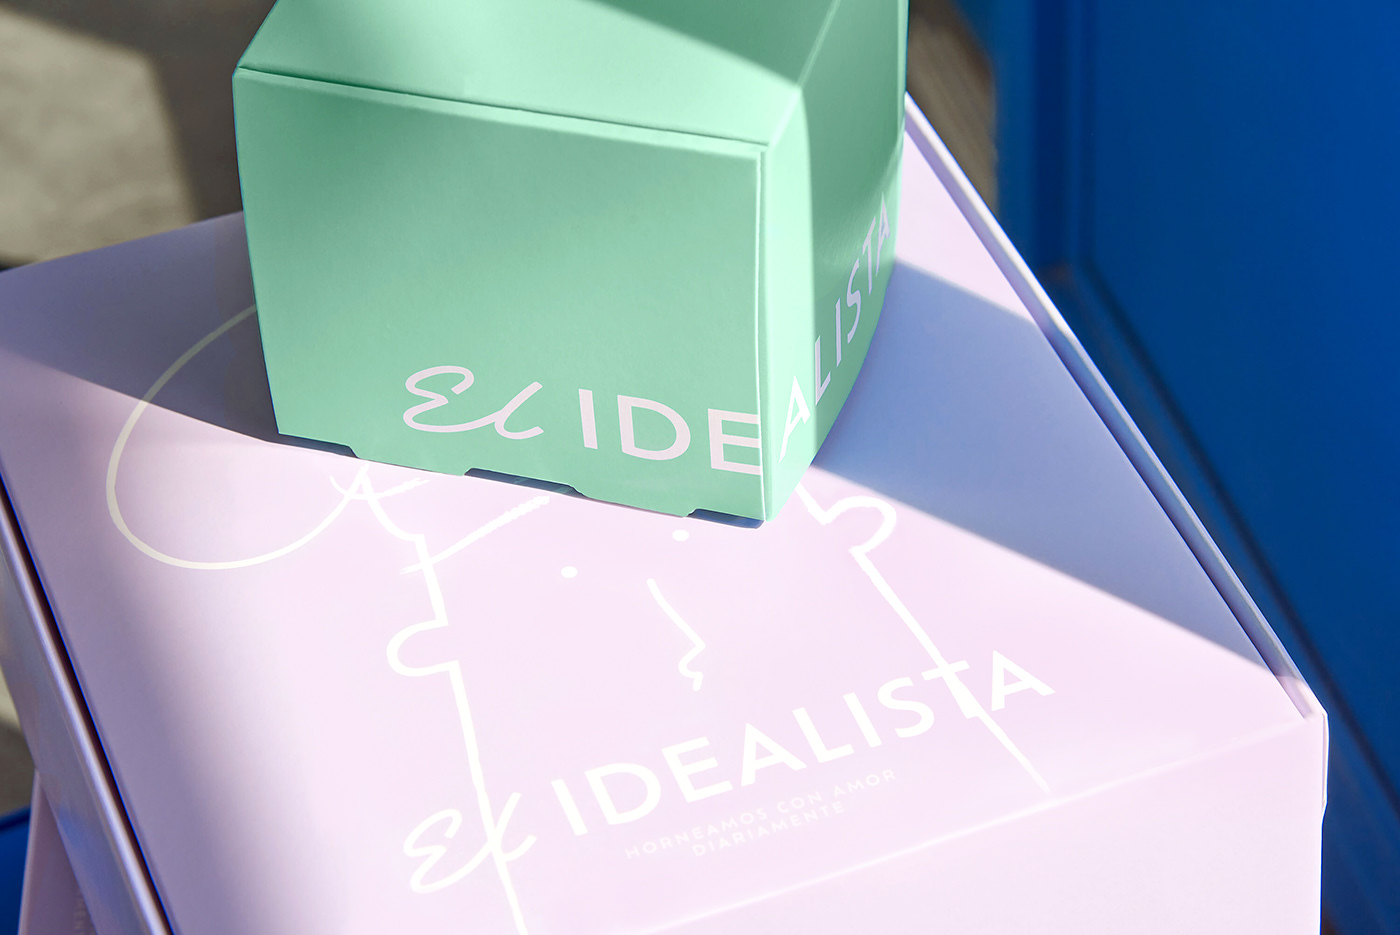 Cookies and pastries boxes for El Idealista
